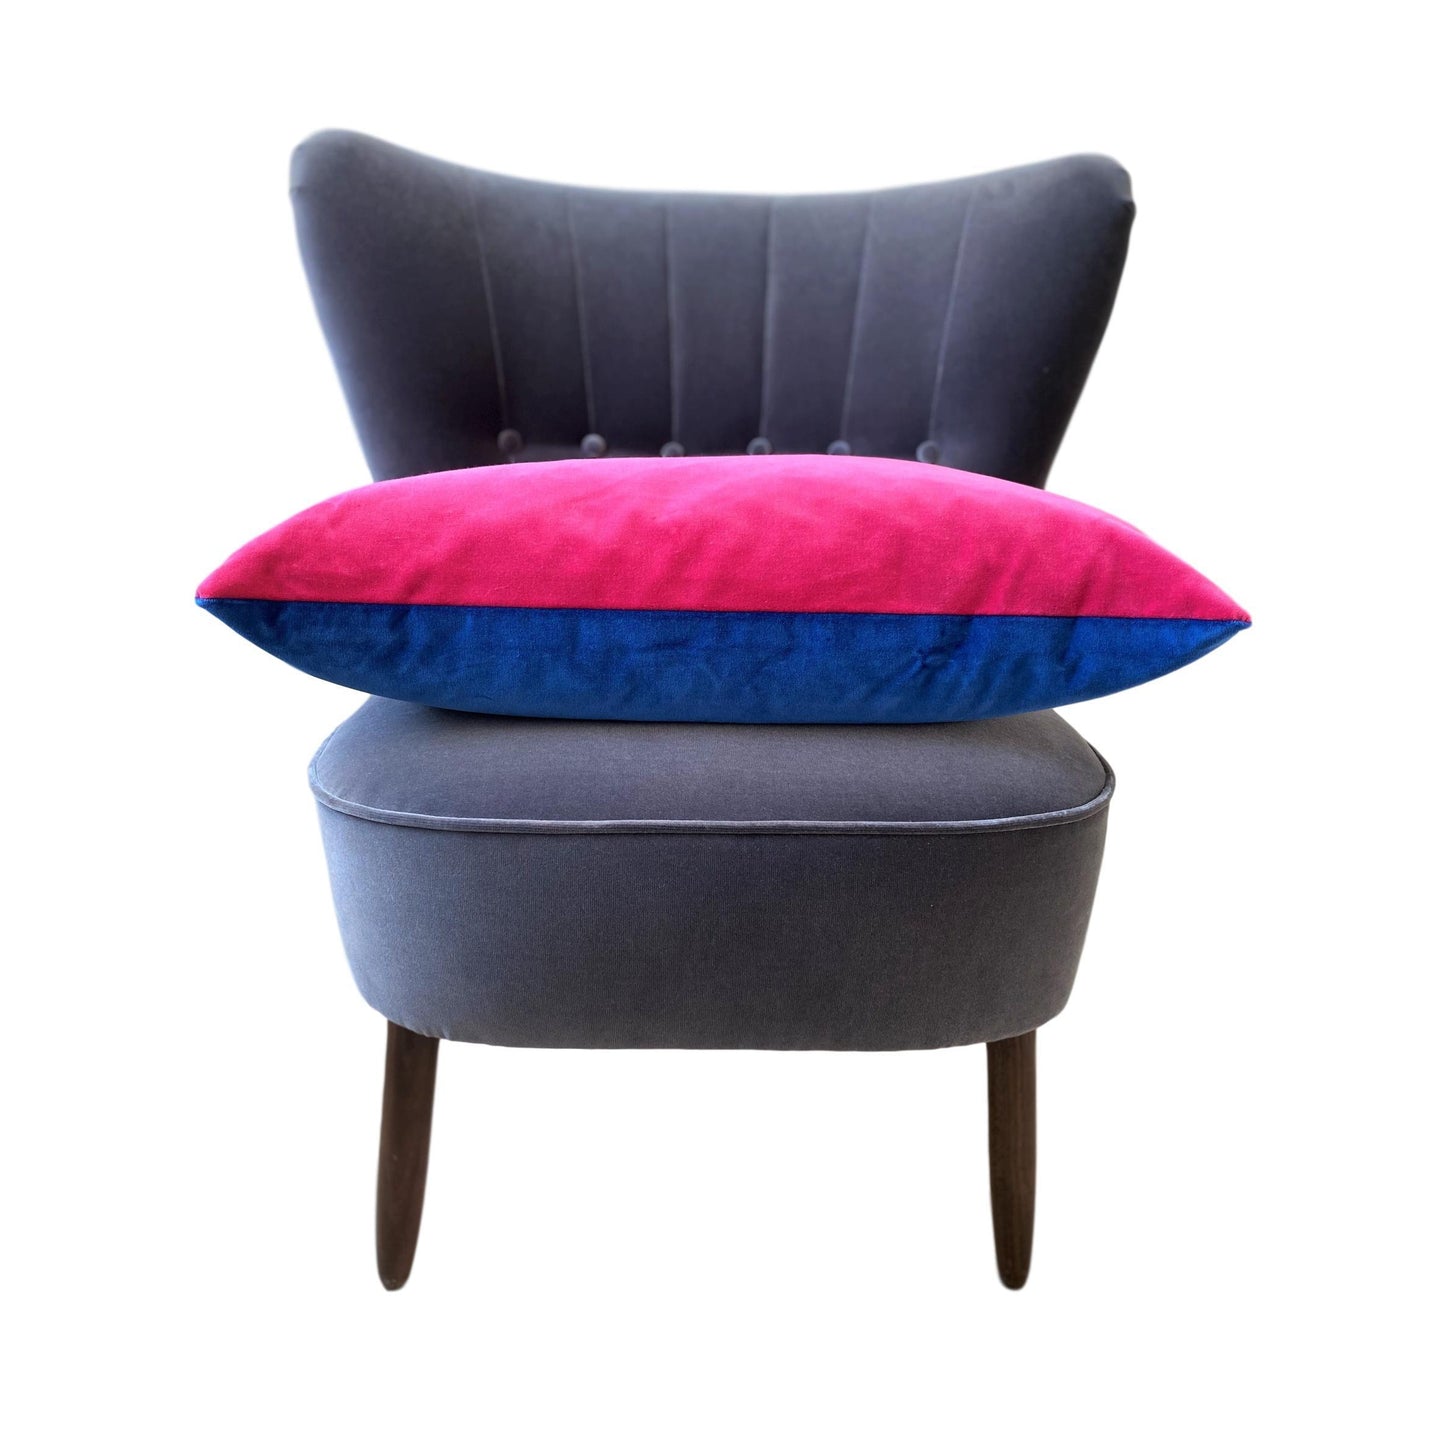 Royal Blue Velvet Cushion Cover with Bright Pink